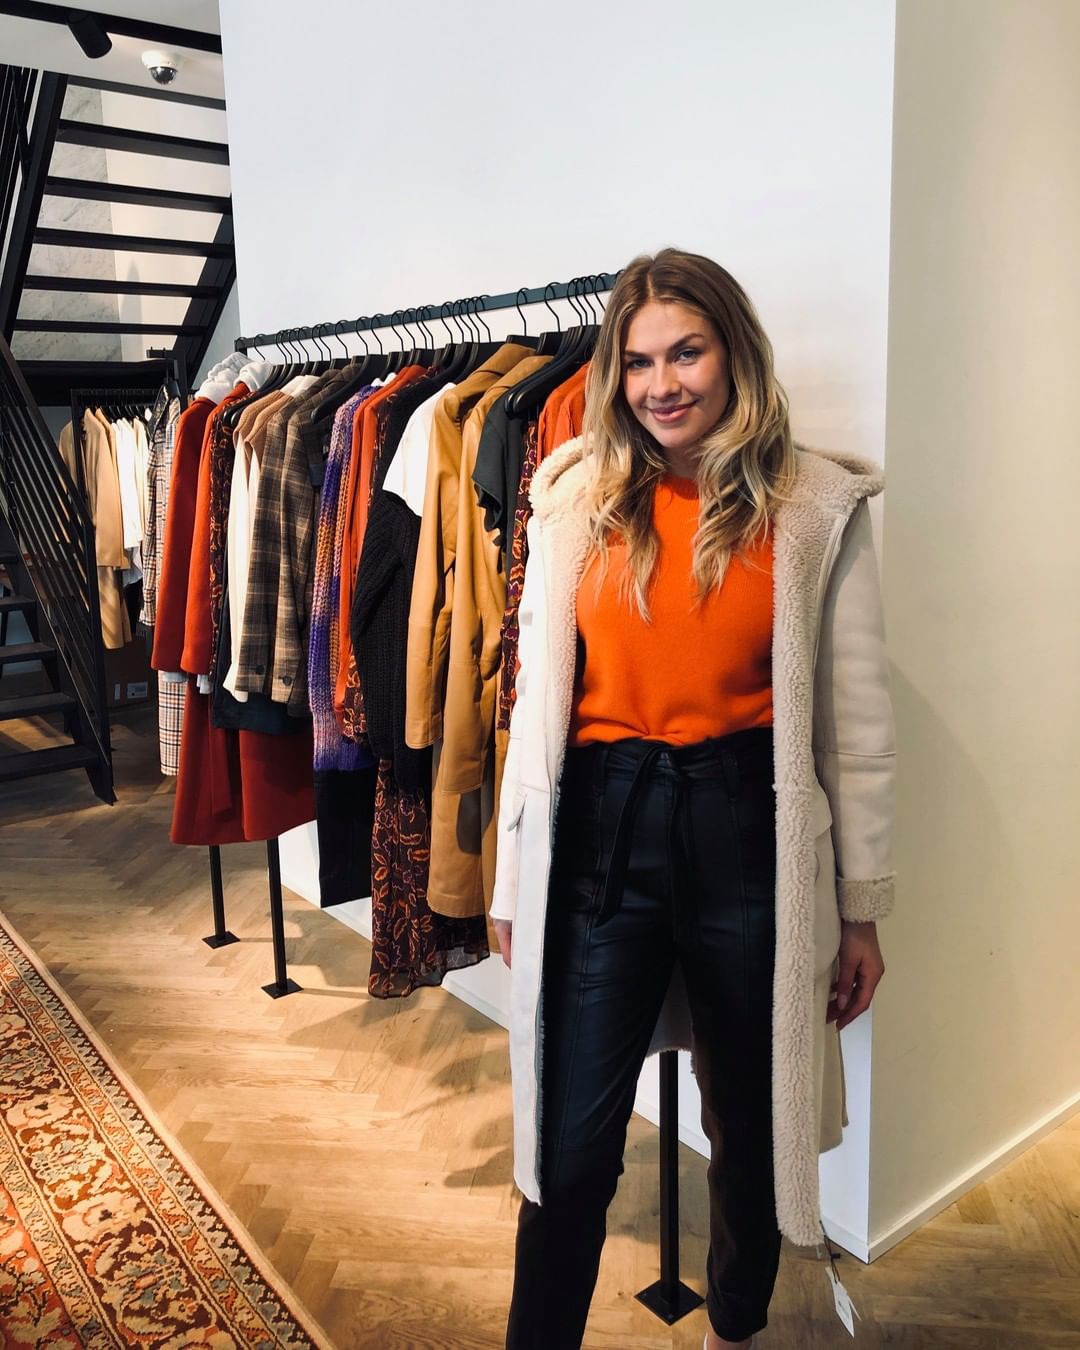 SET by Maya Junger - Last week Team SET hosted an exclusive preview of our new Portobello Road collection in our Berlin-Mitte store. We were so happy to reunite with our friends of SET after such a lo...